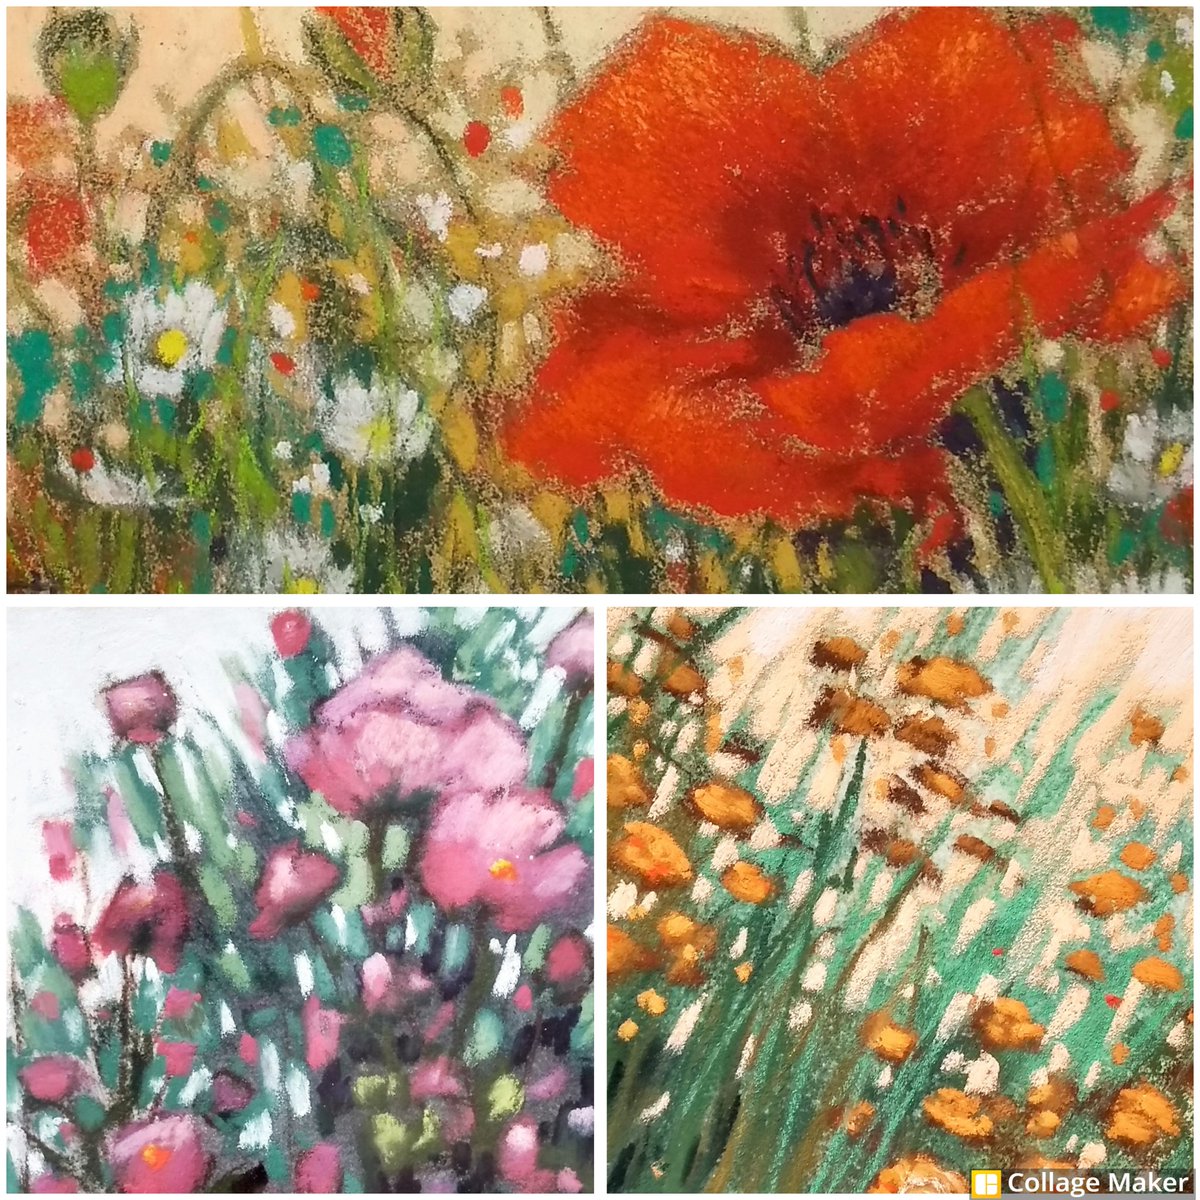 Three very small original floral pastels, each is just £25.
A lovely little gift idea.
Original soft pastel paintings  - Tiny Florals etsy.me/3NiIvdg via @Etsy 
#flowers #paintings #SoftPastel